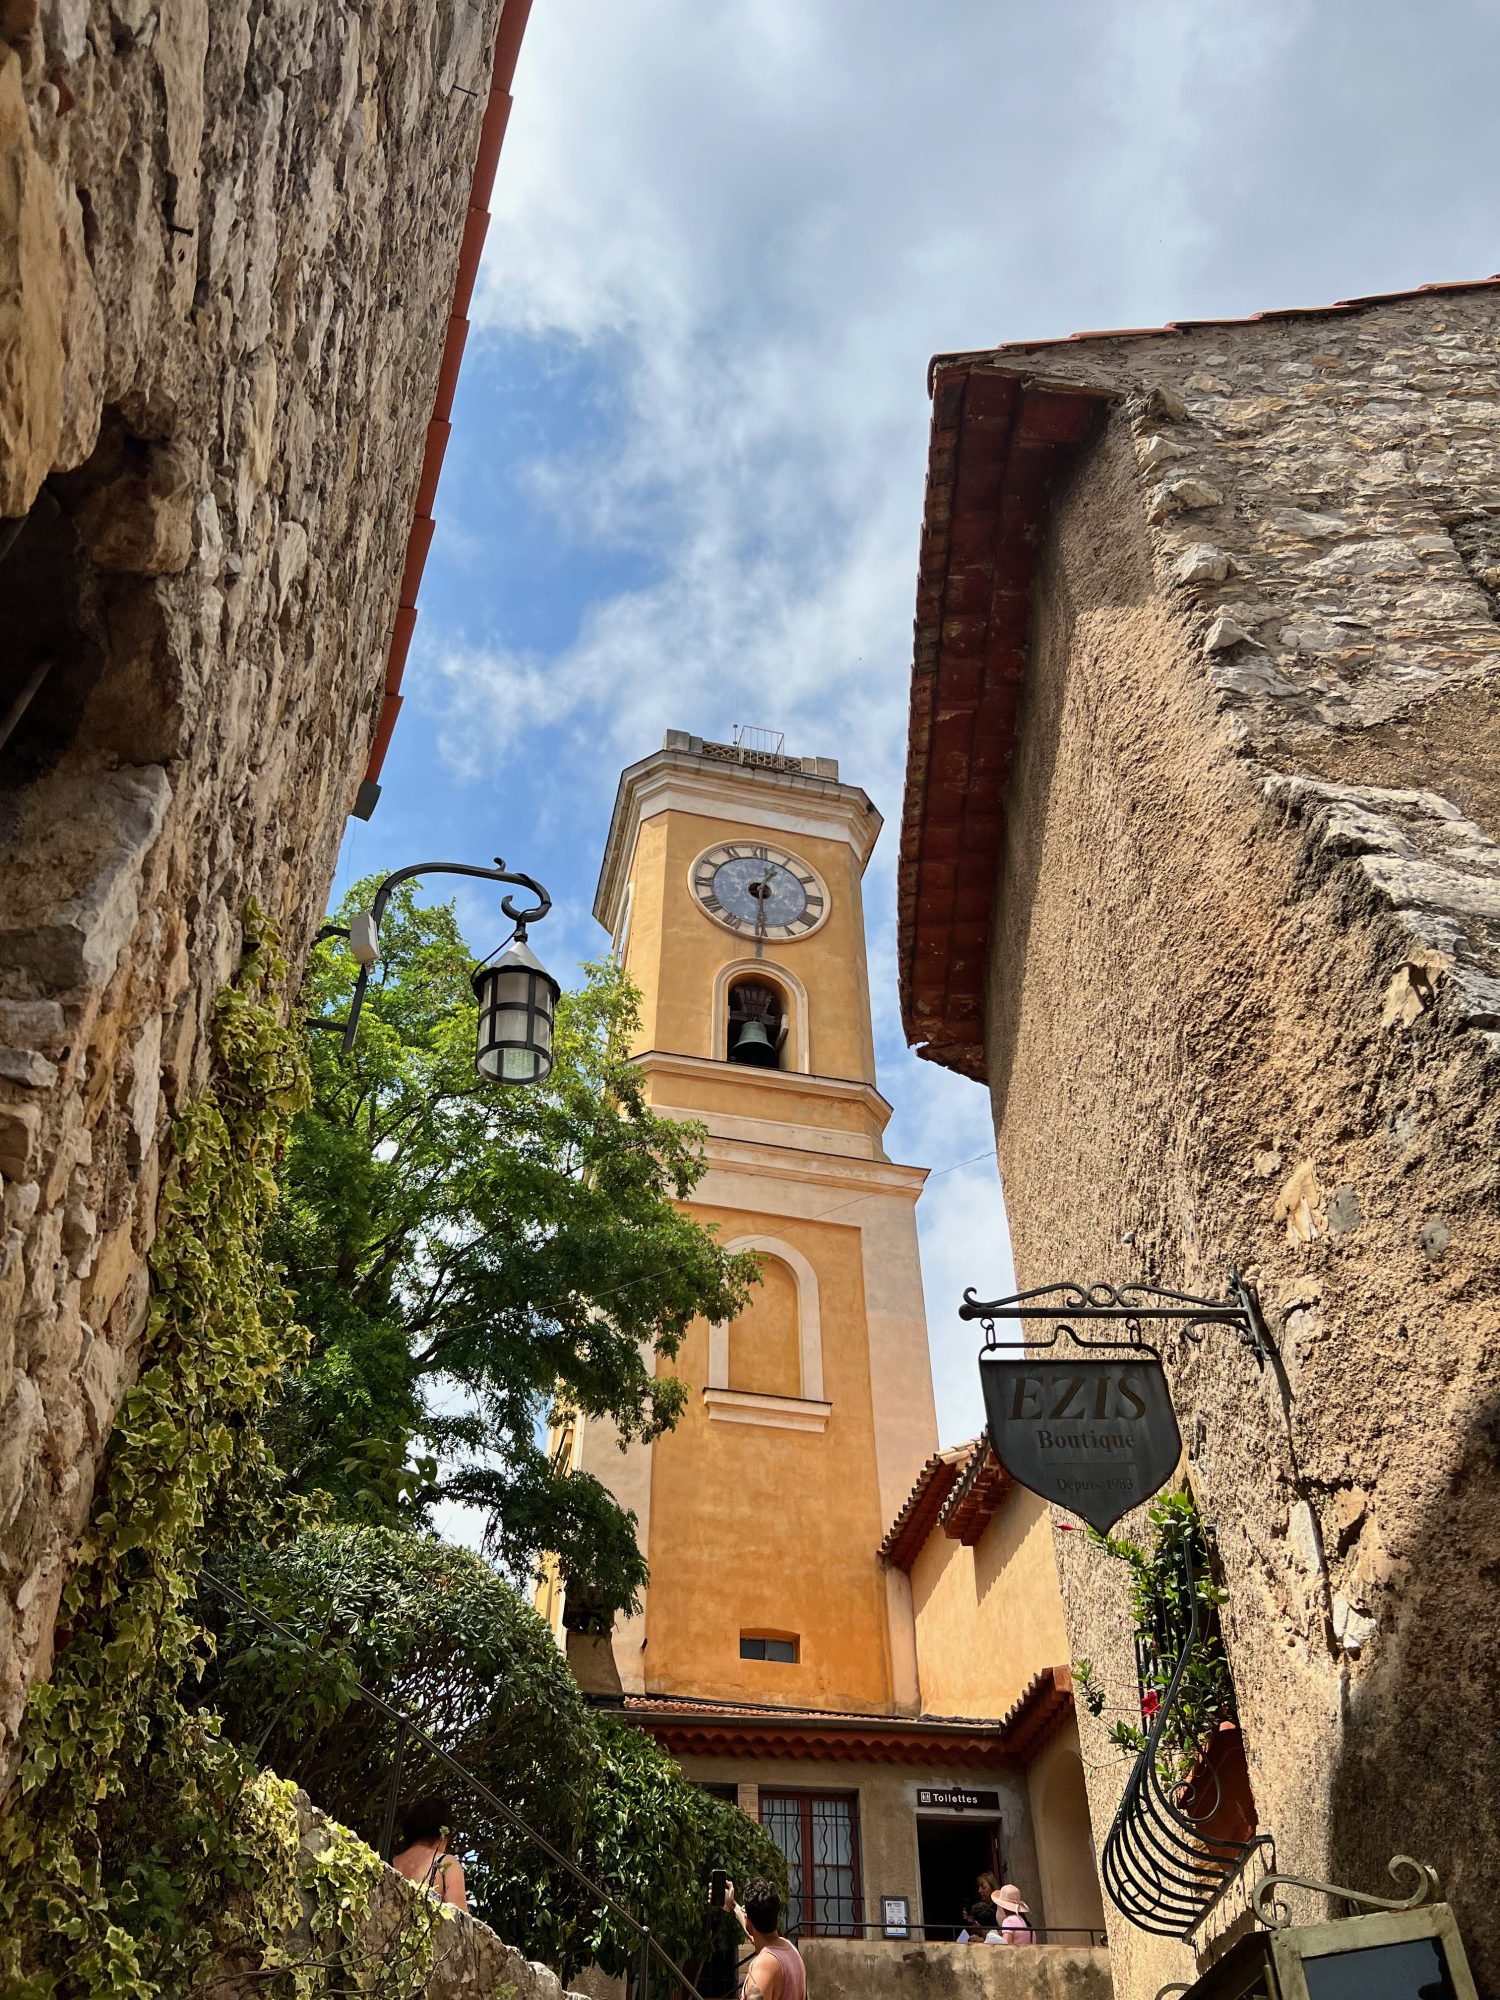 charming city of Eze clock town and cloudy blue sky.